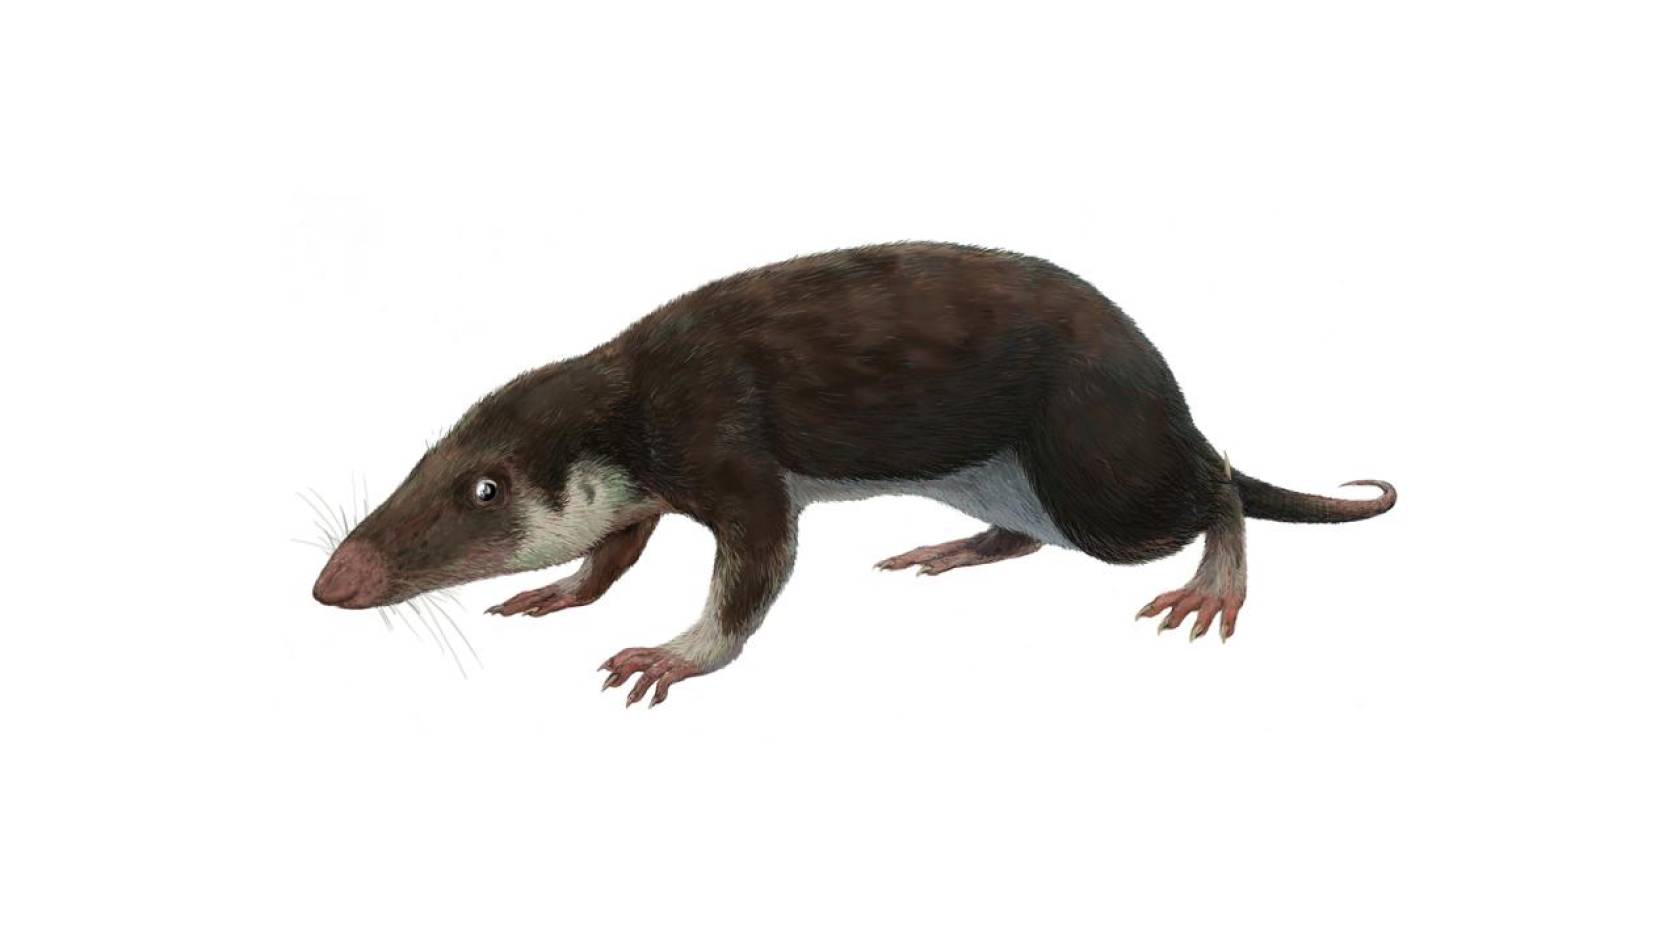 A 200-million-year-old long-snouted mouse-like animal, Morganucodon, which our common ancestor probably resembled